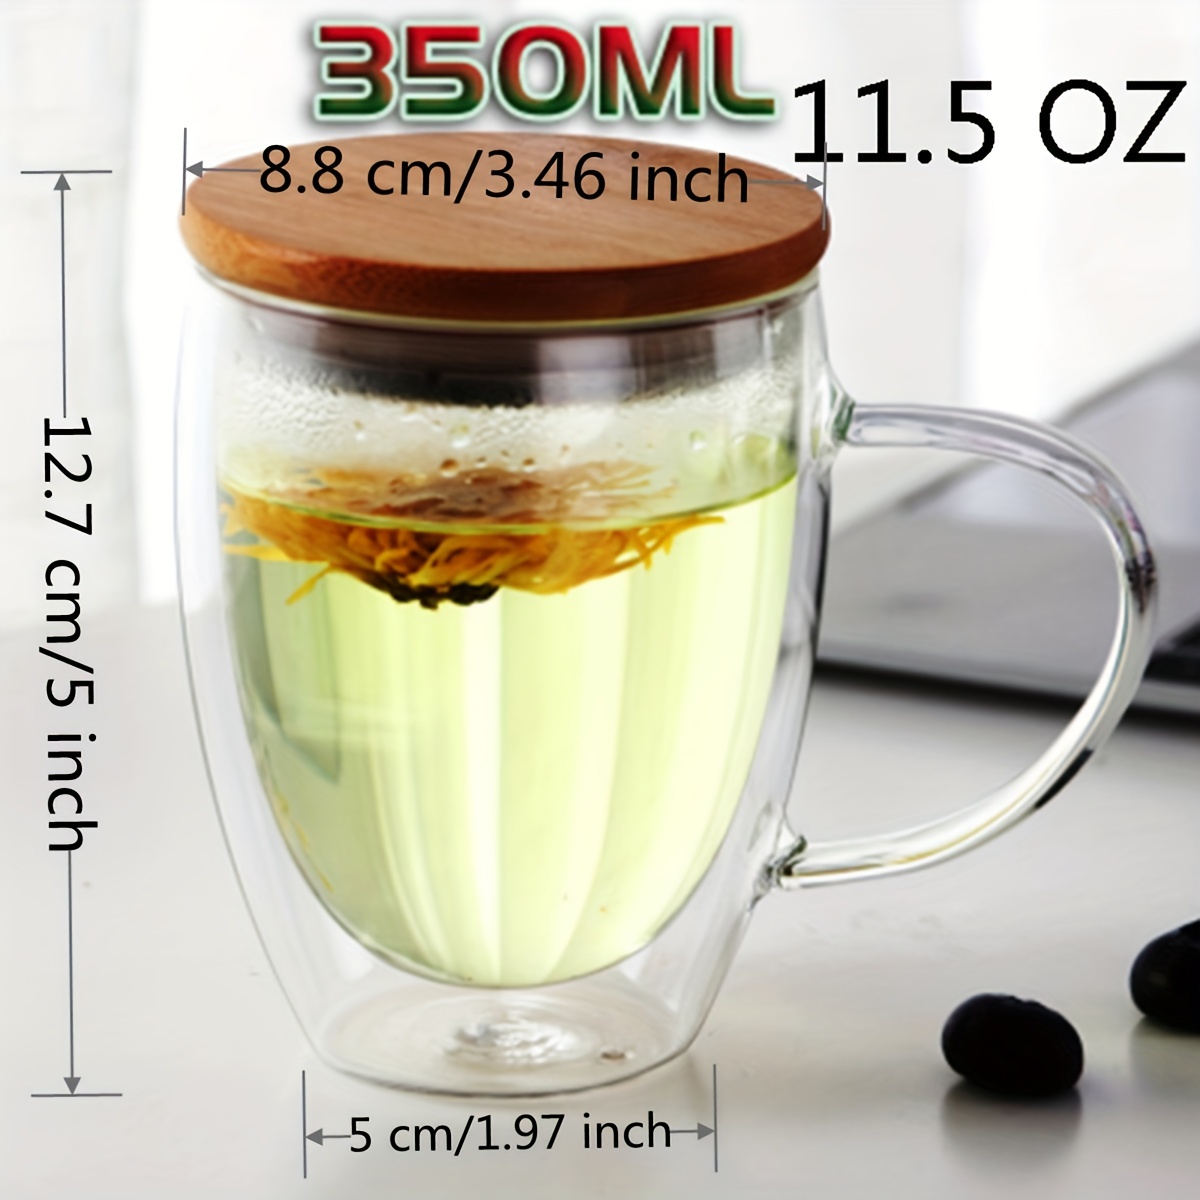 1pcs Double Wall Lnsulated Glass Coffee Mugs with Handle Clear Espresso Cups  Home Mug for Milk Latte Cappuccino Tea Water